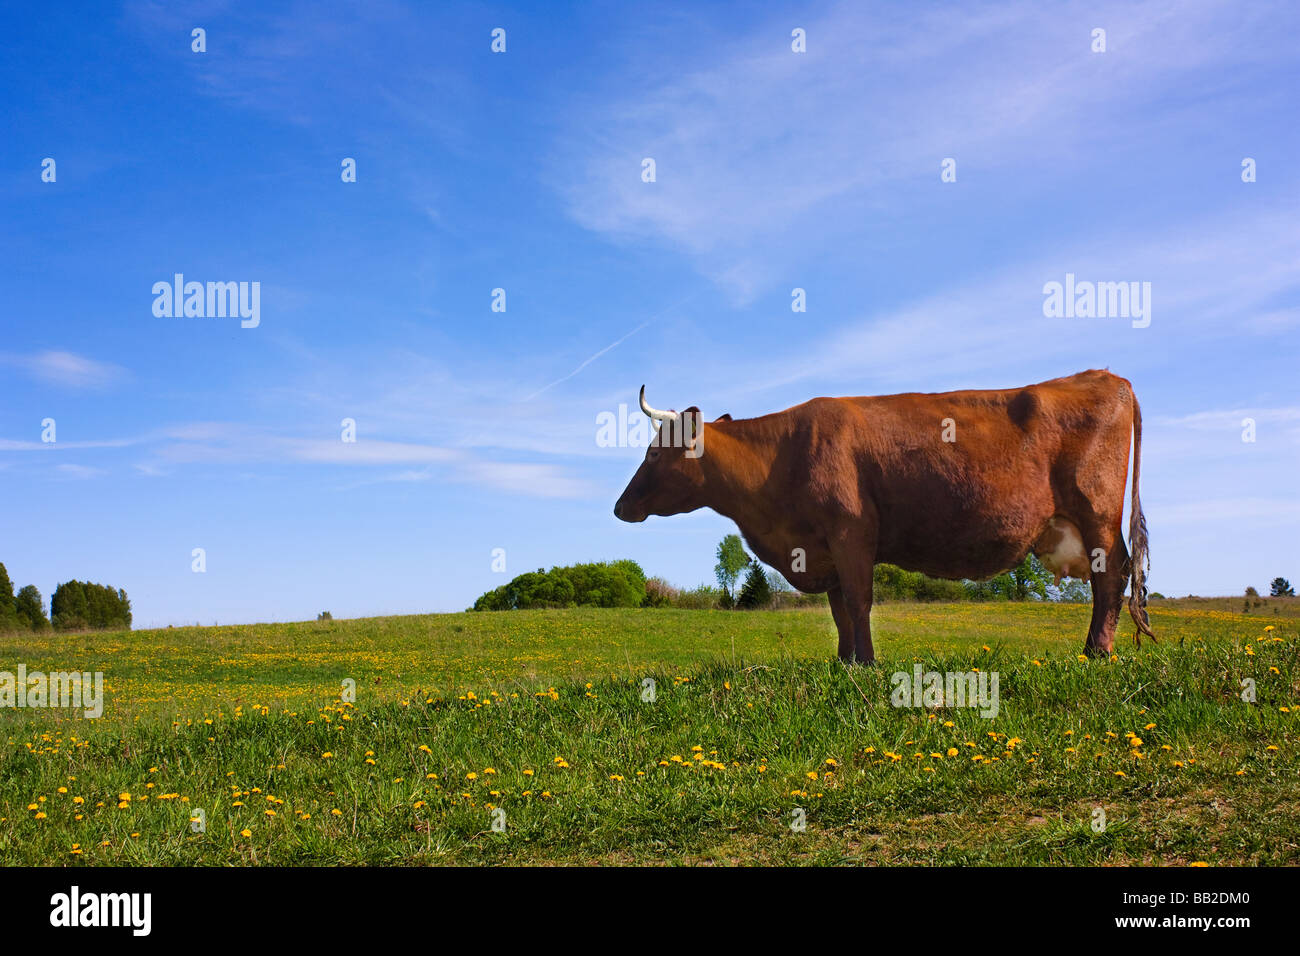 cow against a background of blue sky the grass dandelion Stock Photo